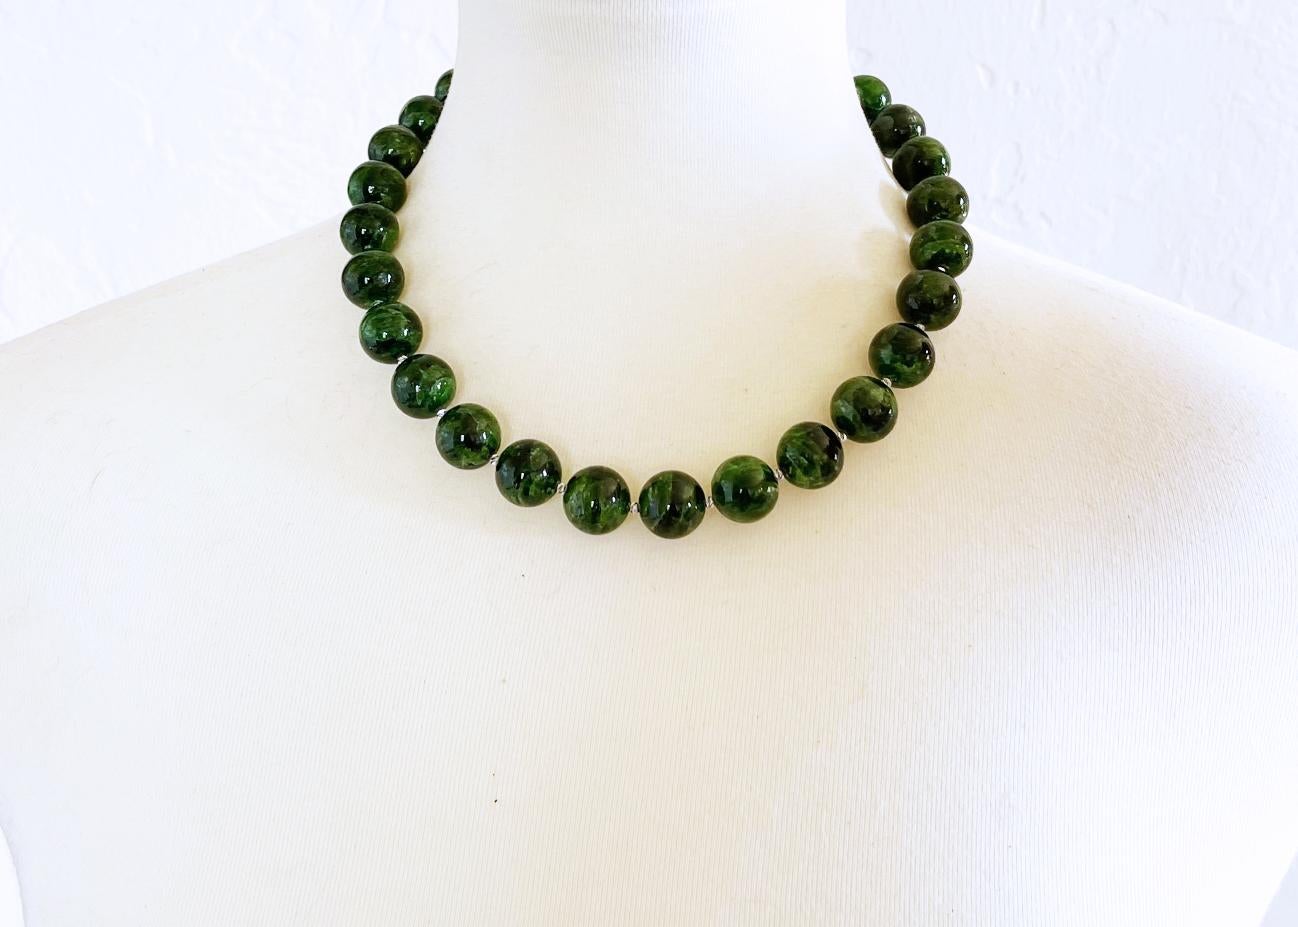 Dazzling natural chrome diopside necklace made with round 15mm gorgeous chrome diopside beads, sterling silver accent beads, and finished with an elegant clasp. Handcrafted in the USA by Rocat Designs. This stunning necklace measures approximately